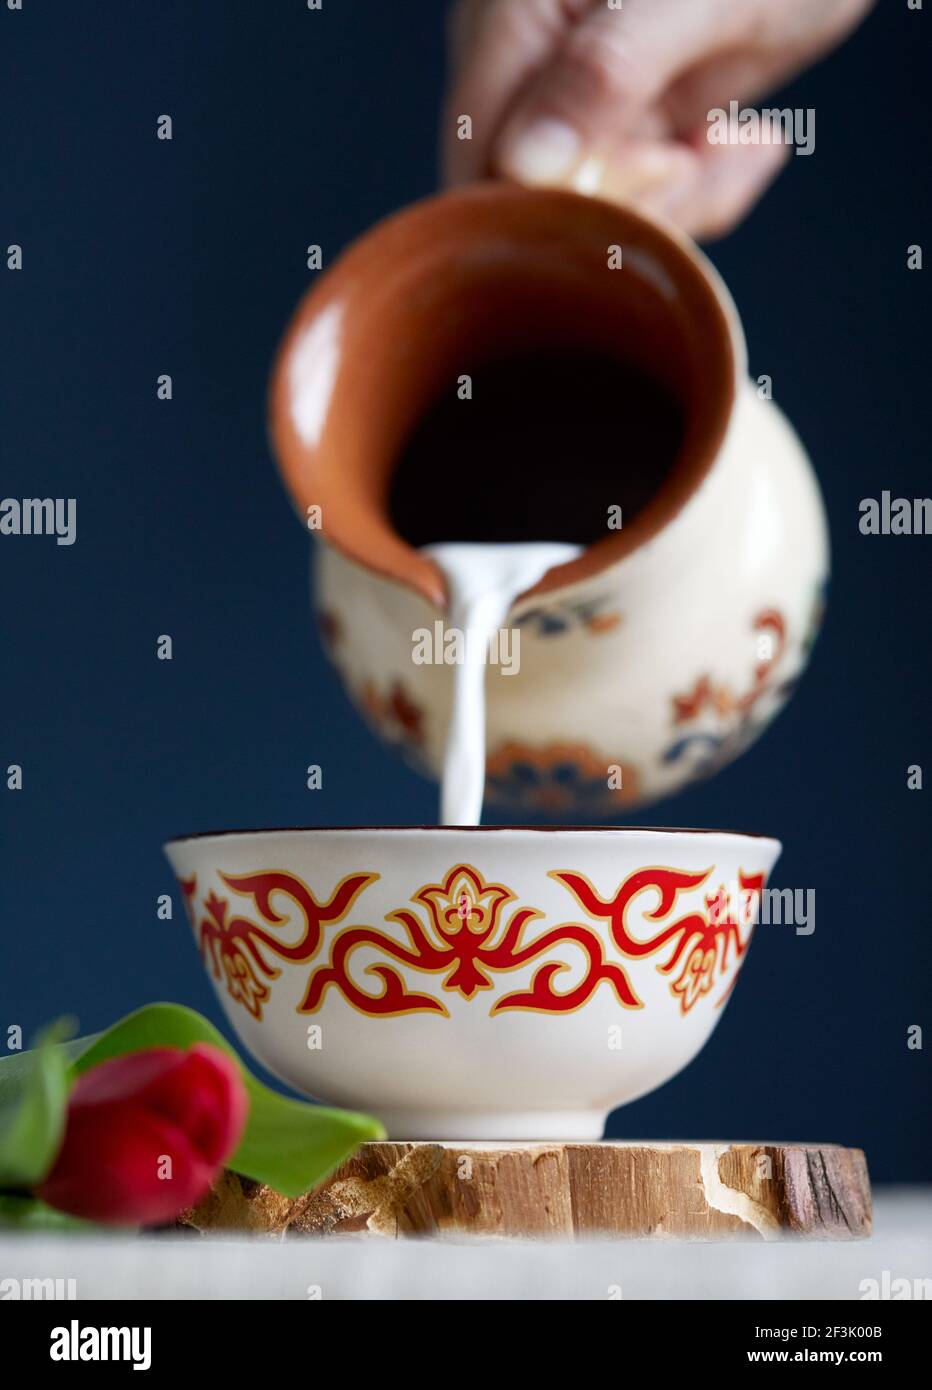 Kazakh woman pouring out milk in traditional tea bowl kese with Kazakh ornament near read tulips at dark blue background during Nauryz festival. Stock Photo